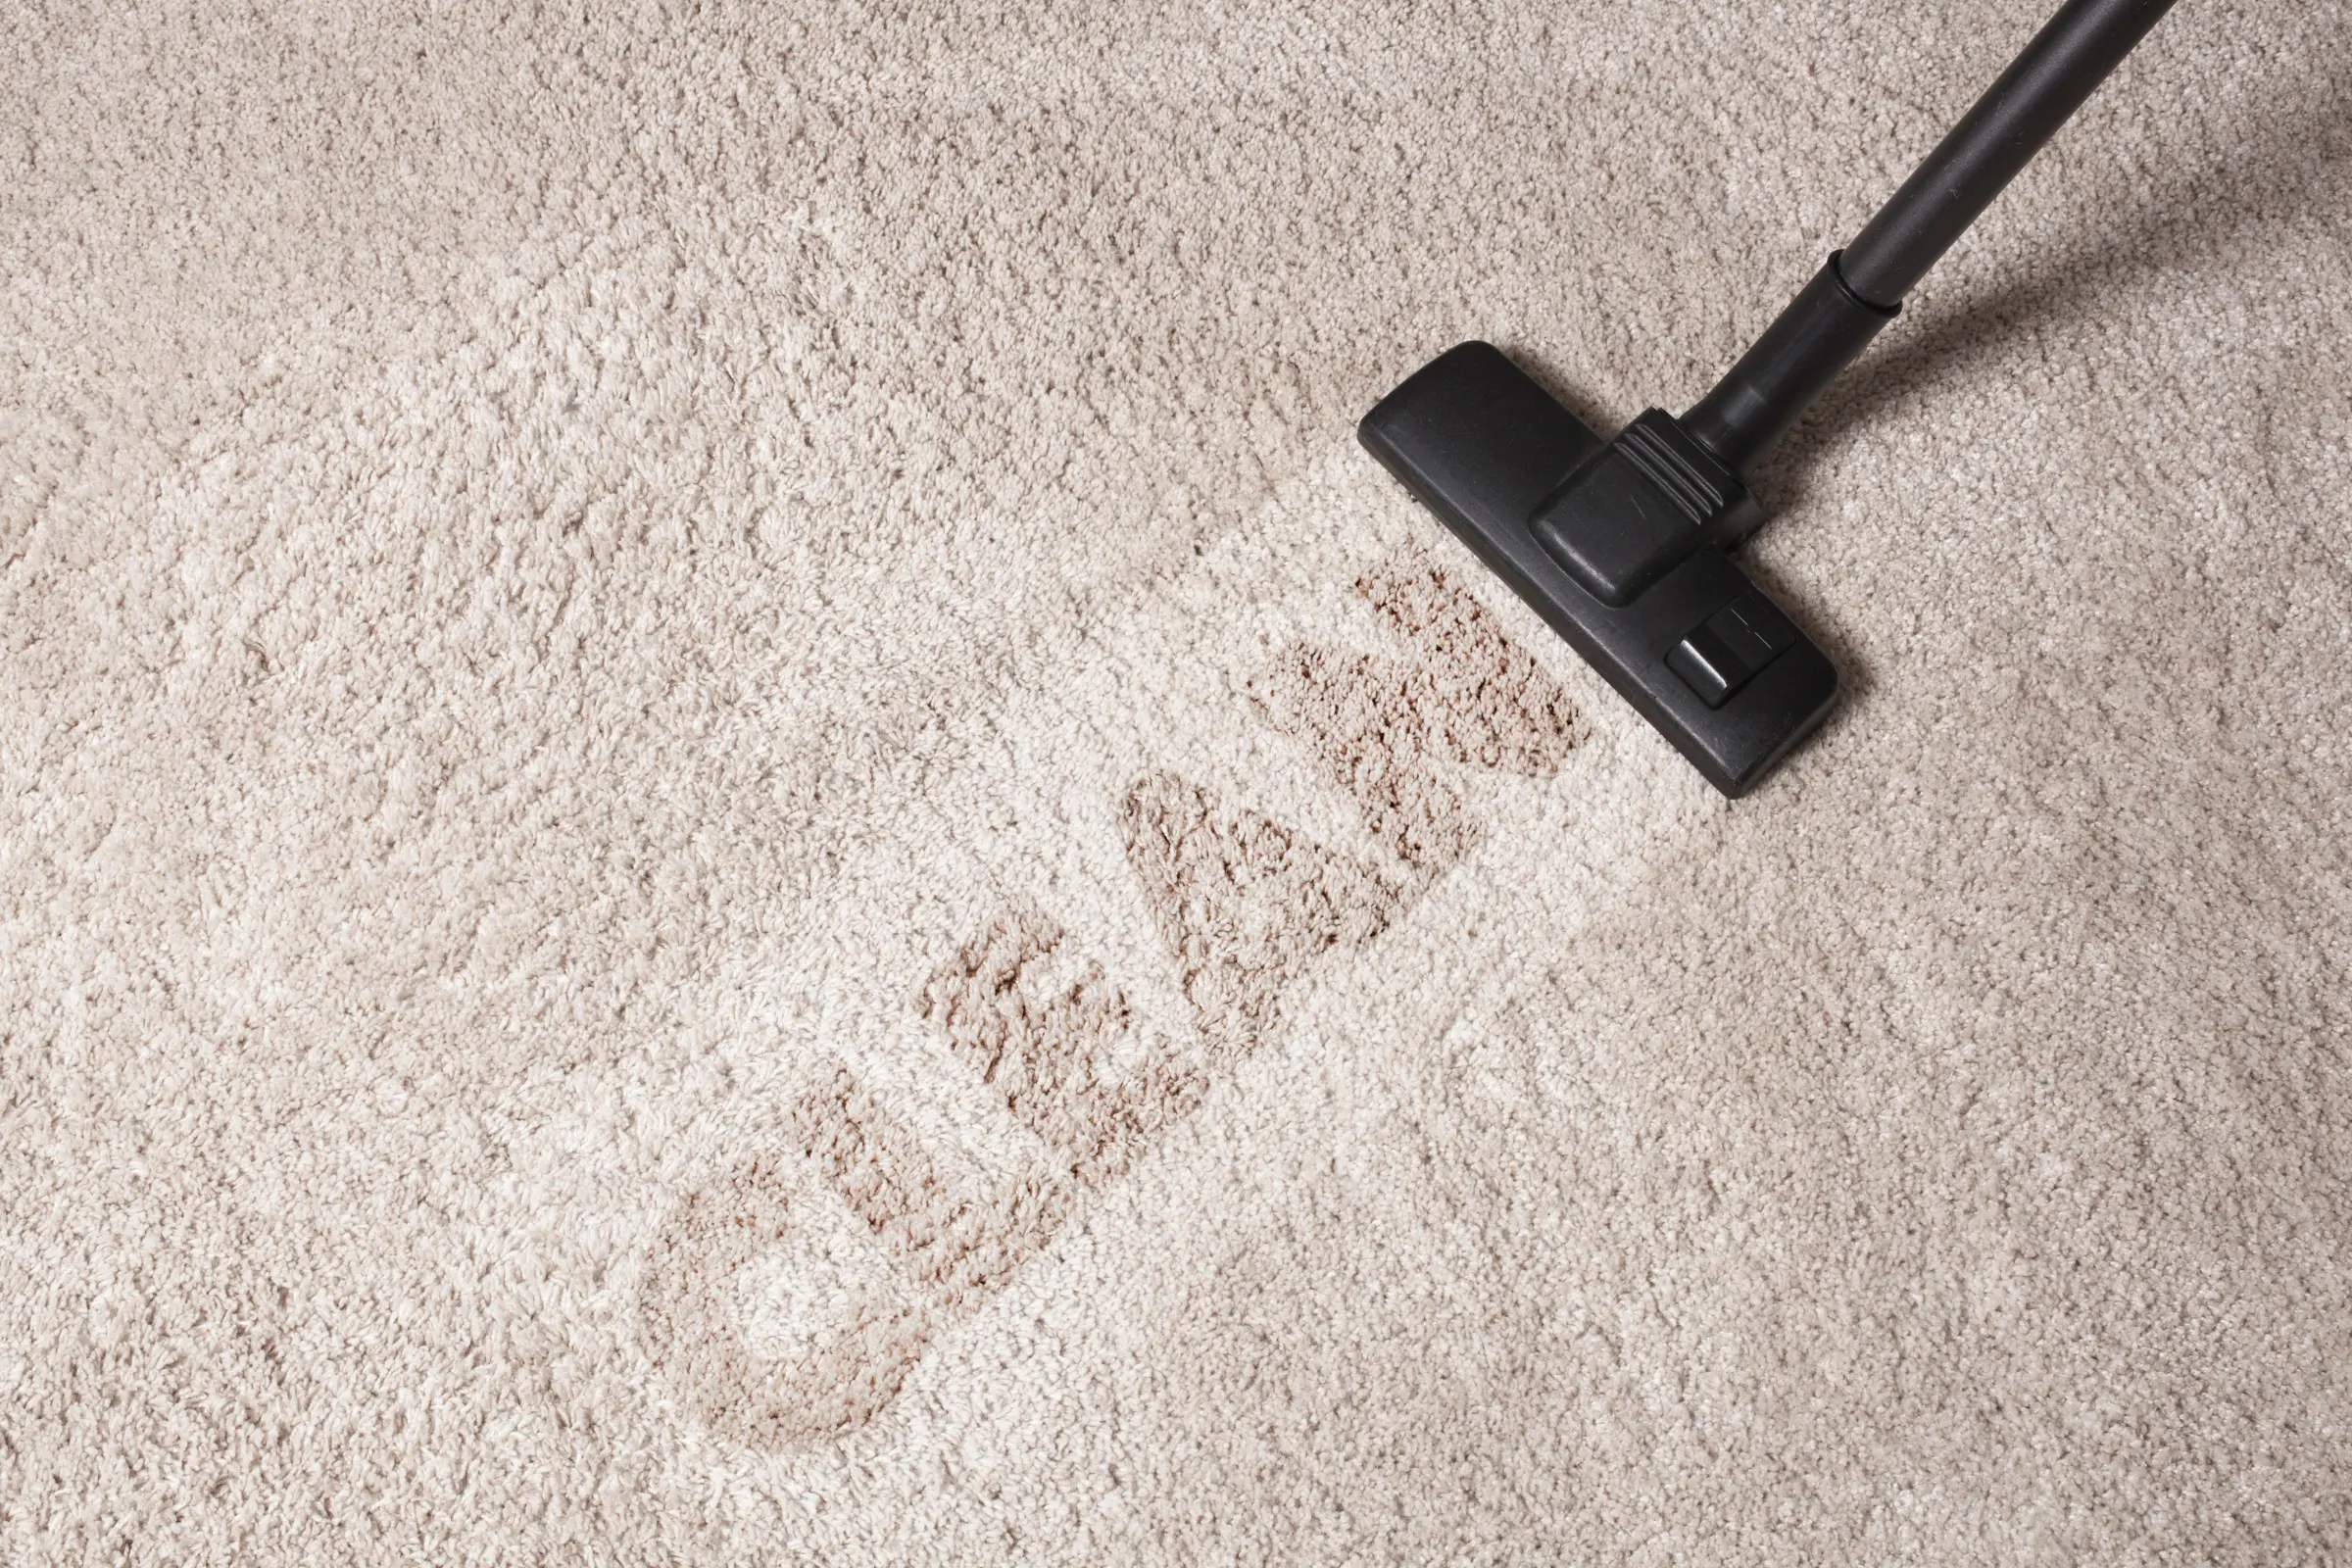 Carpet and Upholstery Cleaning Company London - Klense 03